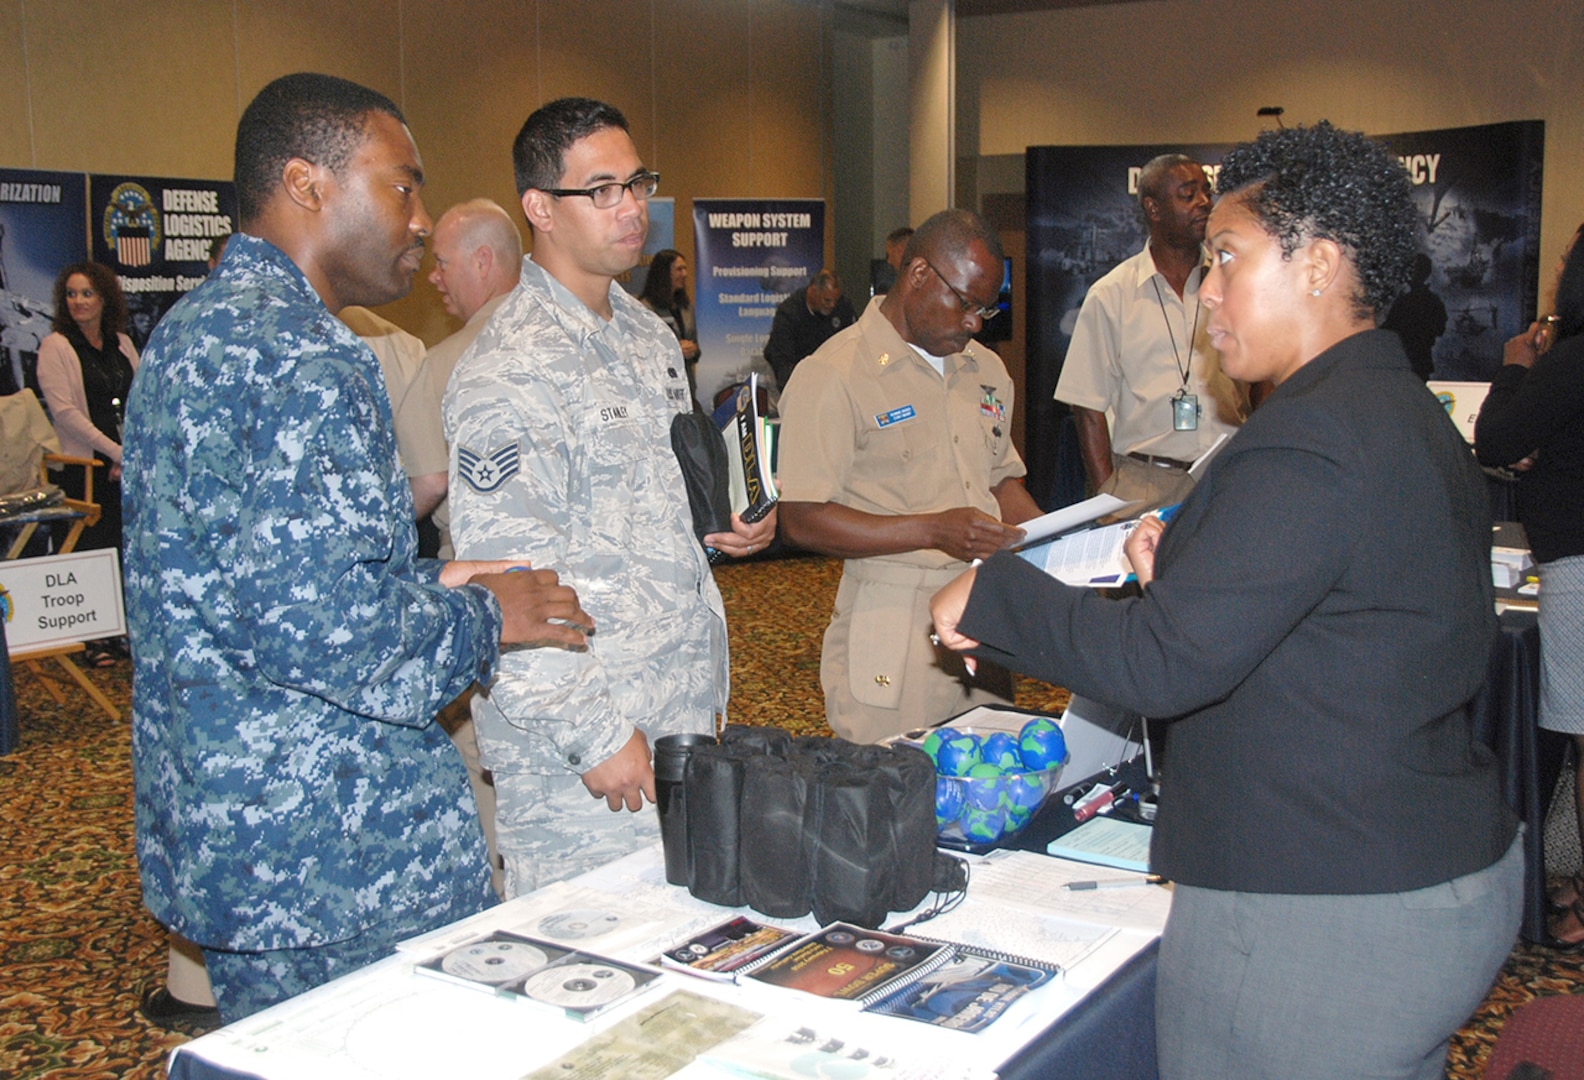 Danielle Booker of DLA Aviation discusses the agency’s mapping capabilities with Navy and Air Force personnel at the DLA Warfighter Support Initiative at Naval Station Norfolk. 